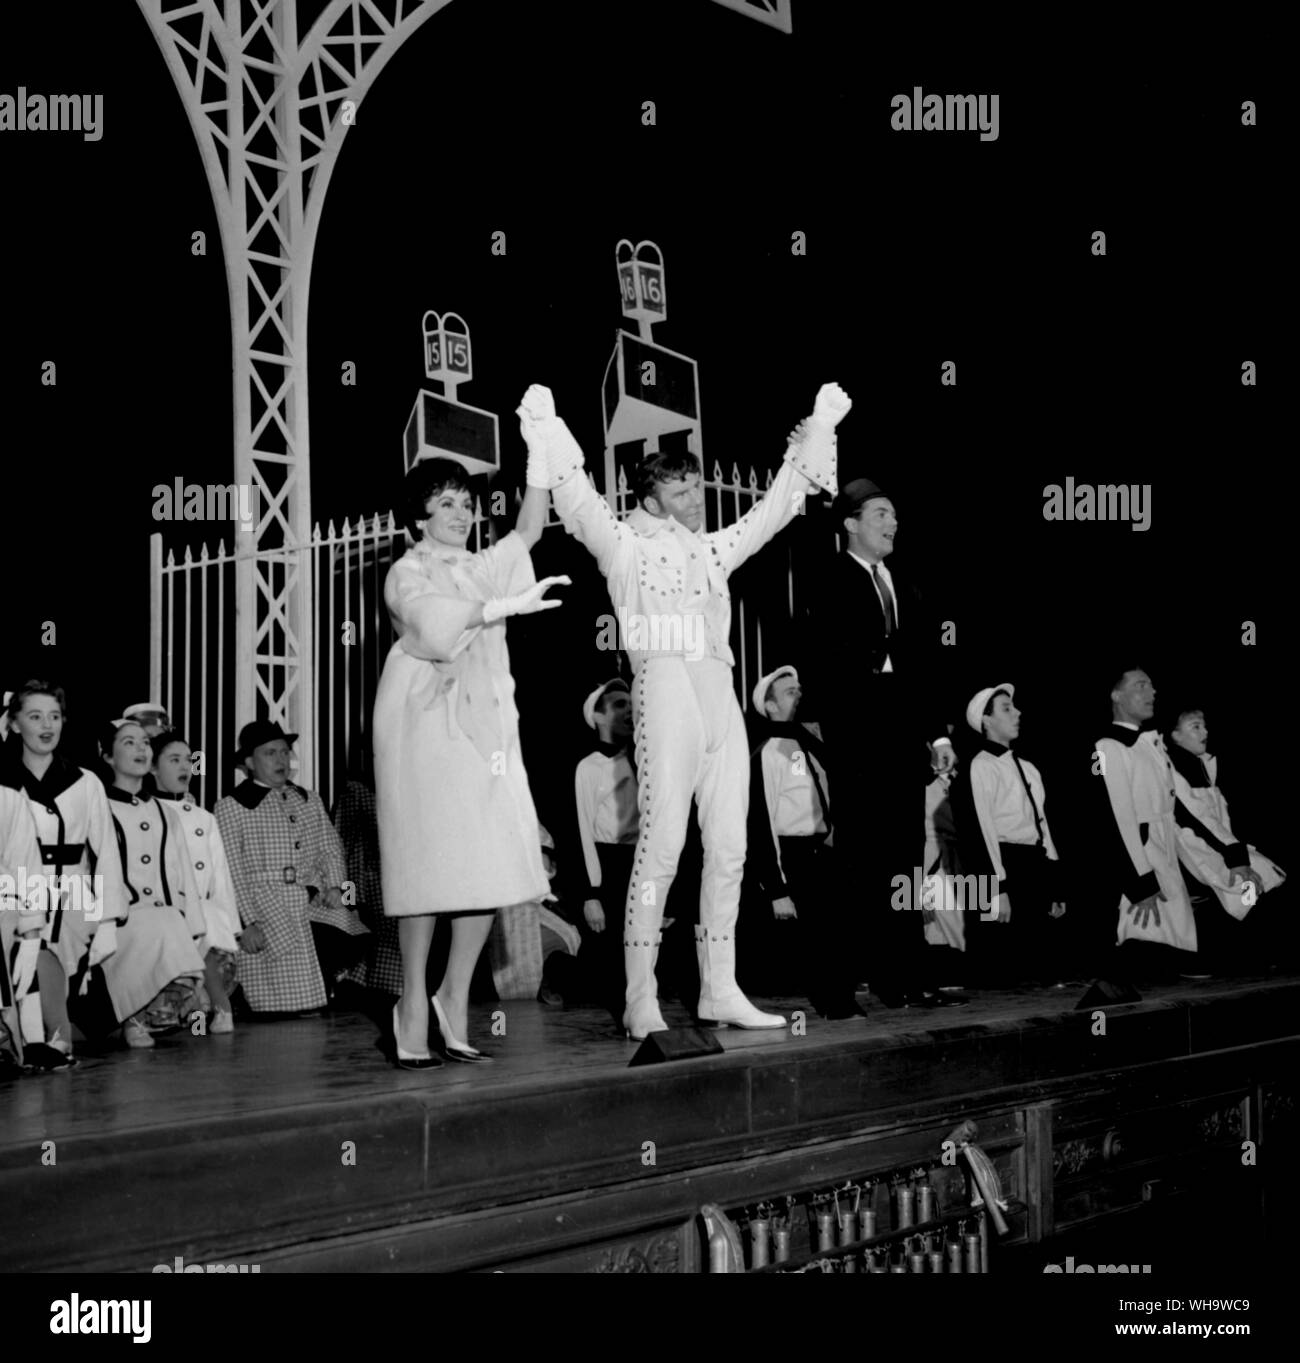 15th June 1961: Marty Wilde (centre stage in white) stars in the musical, Bye, Bye Birdie at London's Haymarket Theatre. To his left is Chita Rivera and to his right, Peter Marshall. Wilde plays a rock 'n' roll star in the show. Stock Photo